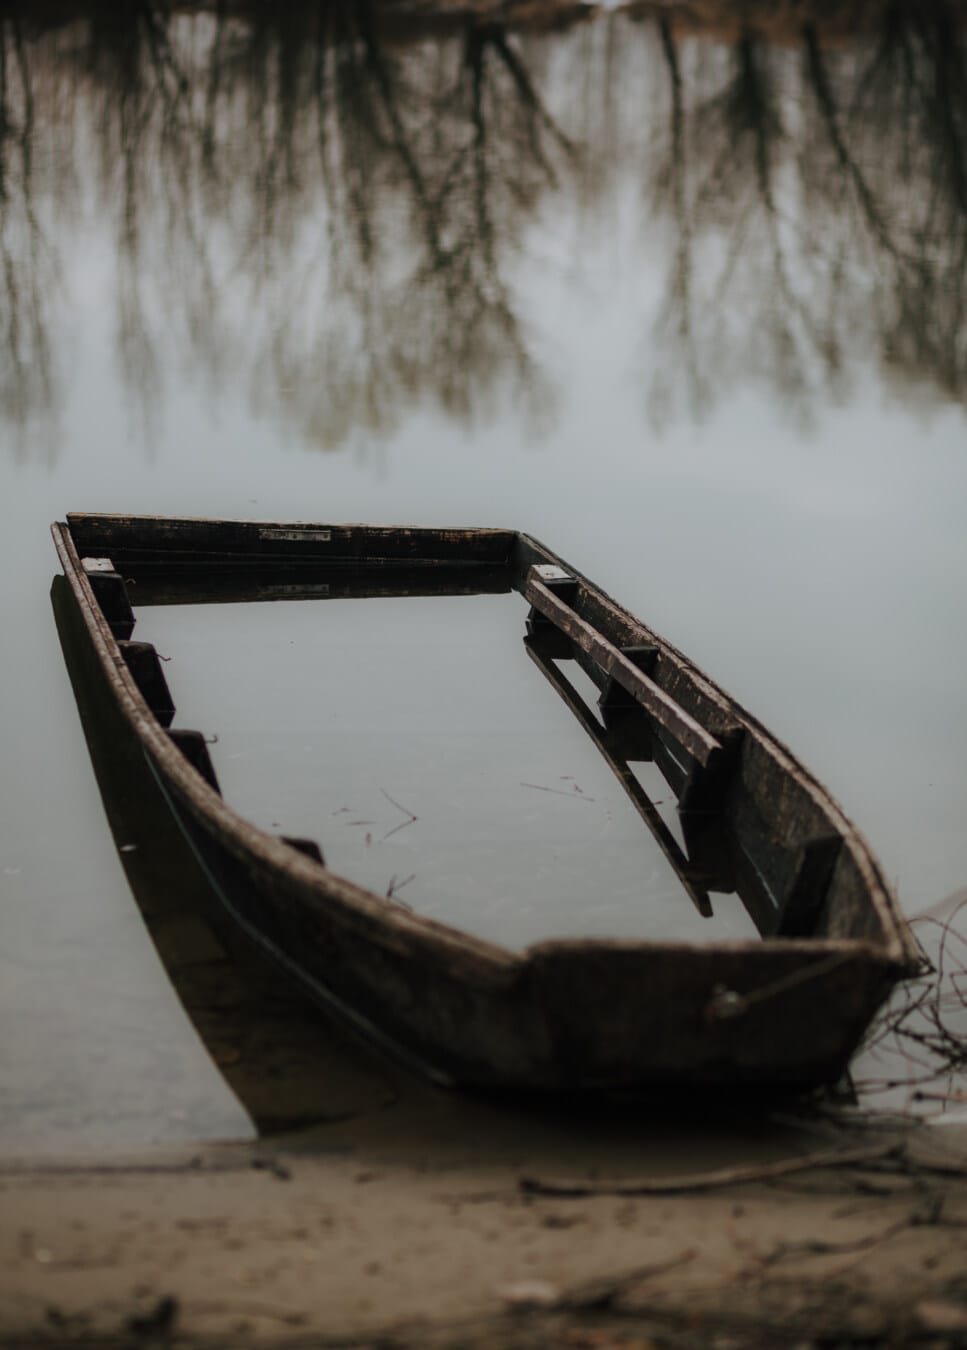 underwater, boat, abandoned, wooden, floodplain, flood, decay, wreck, water, nature